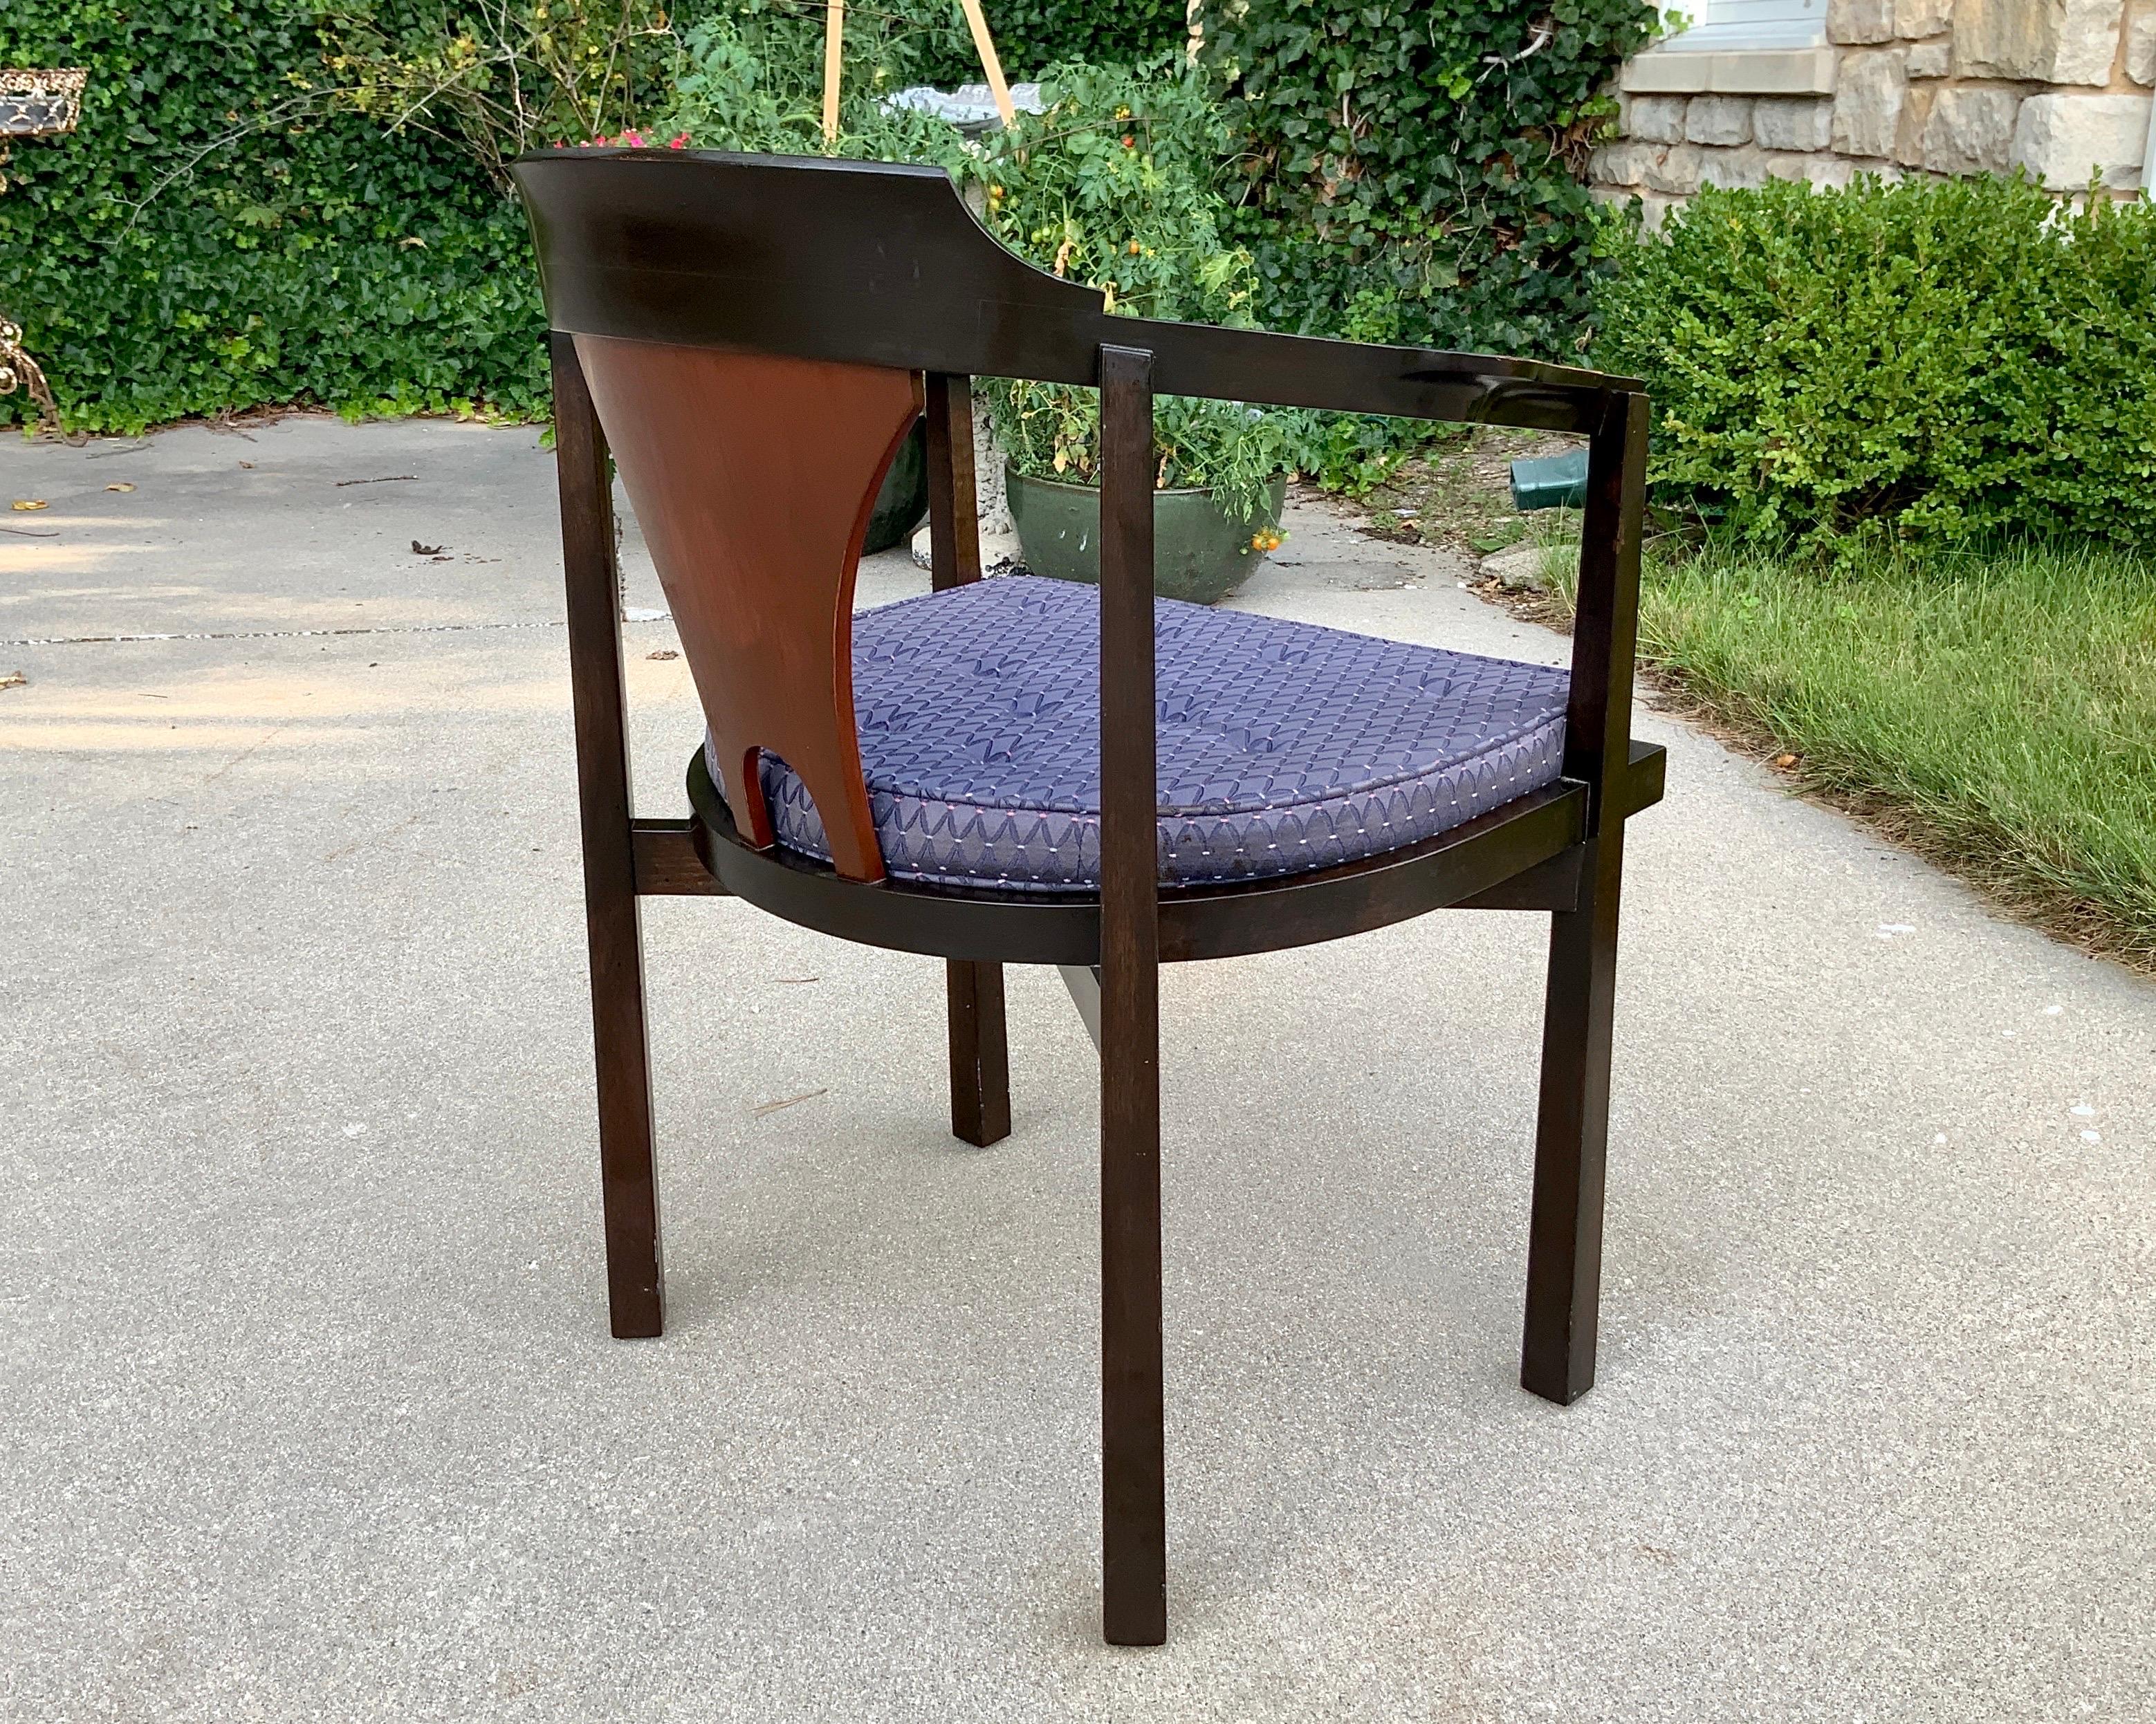 Horseshoe Chair By Edward Wormley For Dunbar, Mid-Century Modern In Good Condition For Sale In Haddonfield, NJ